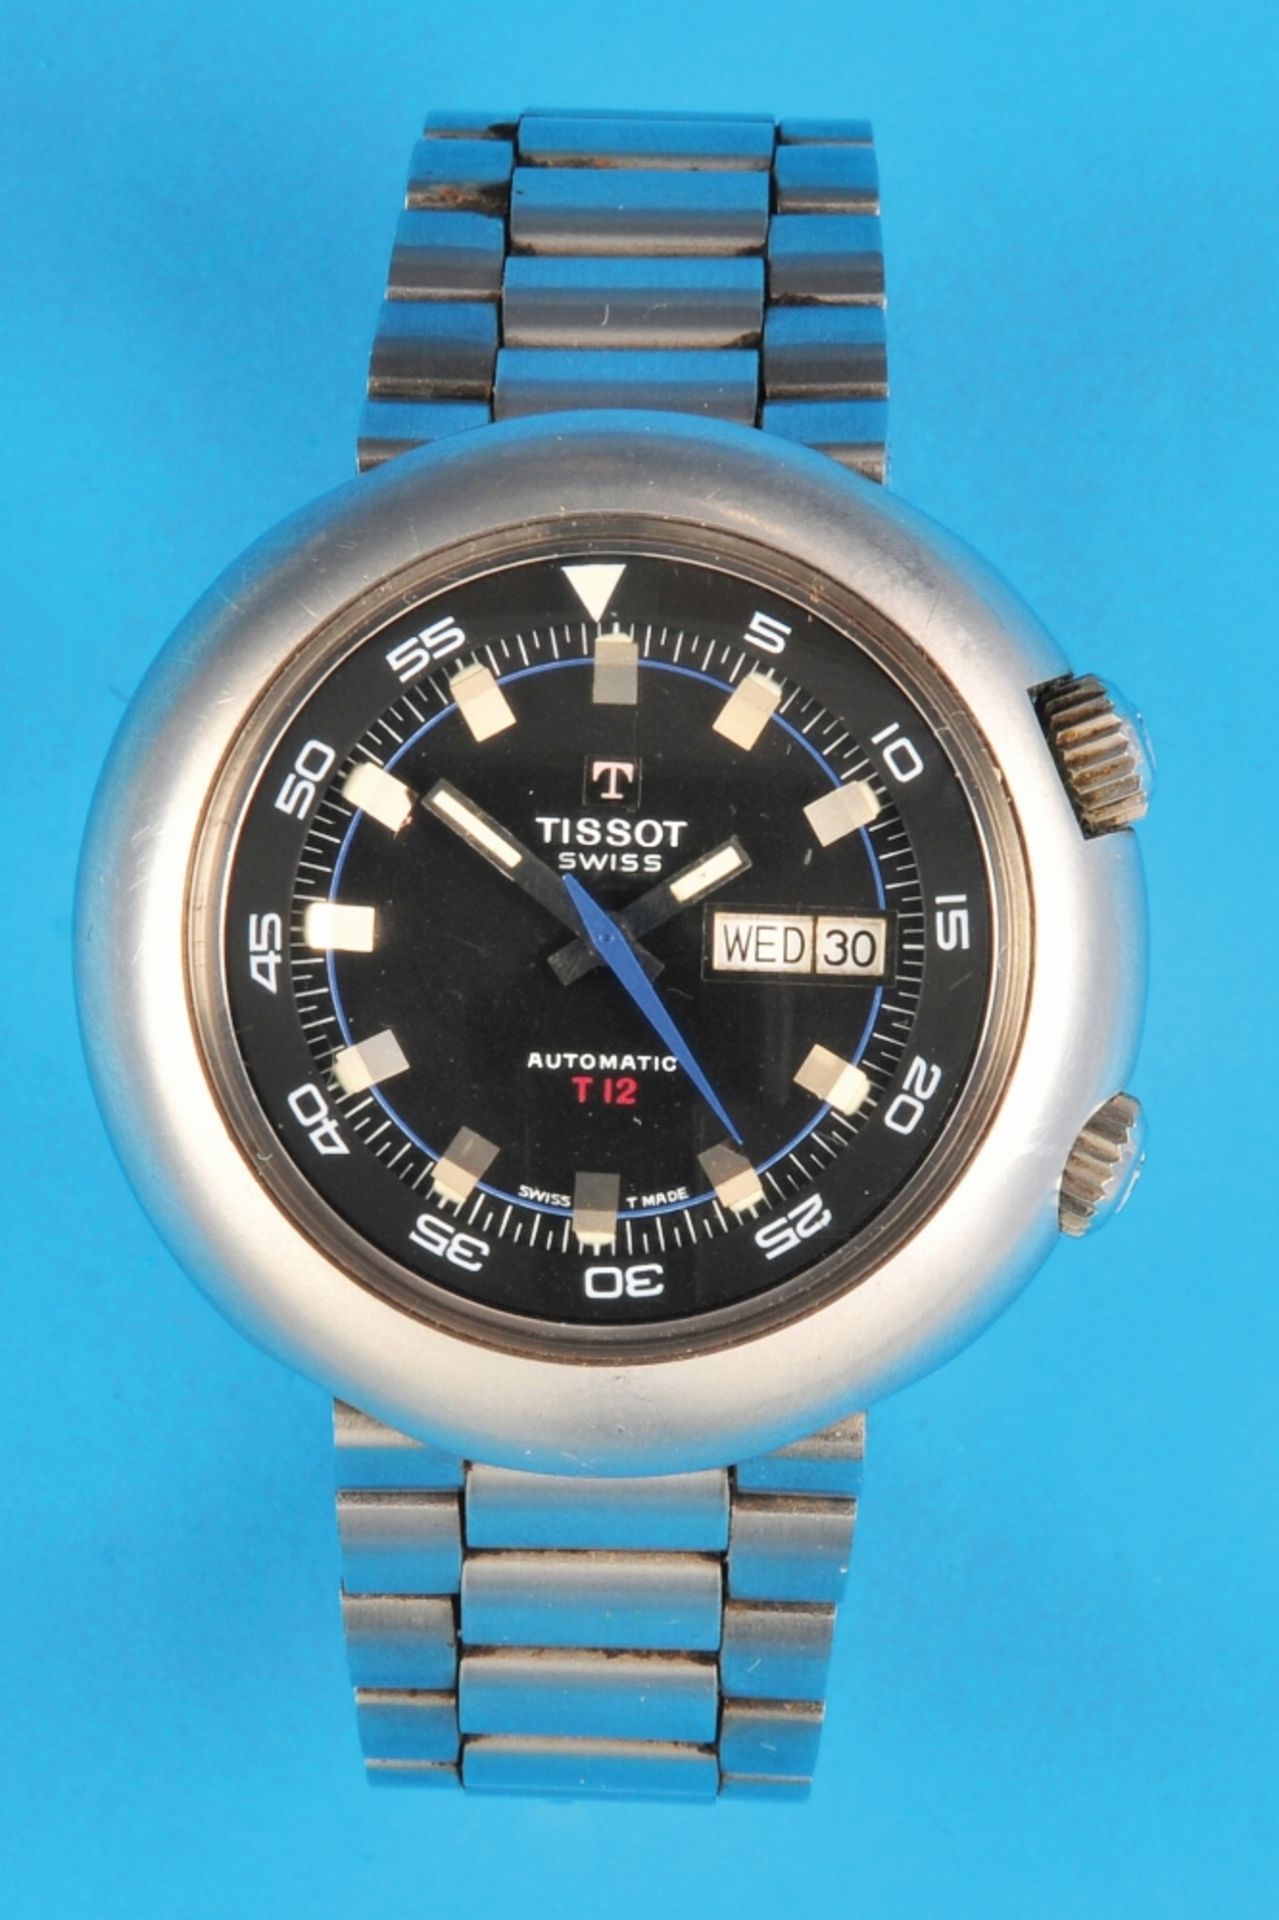 Tissot "T12" Automatic Wristwatch with rotating bezel